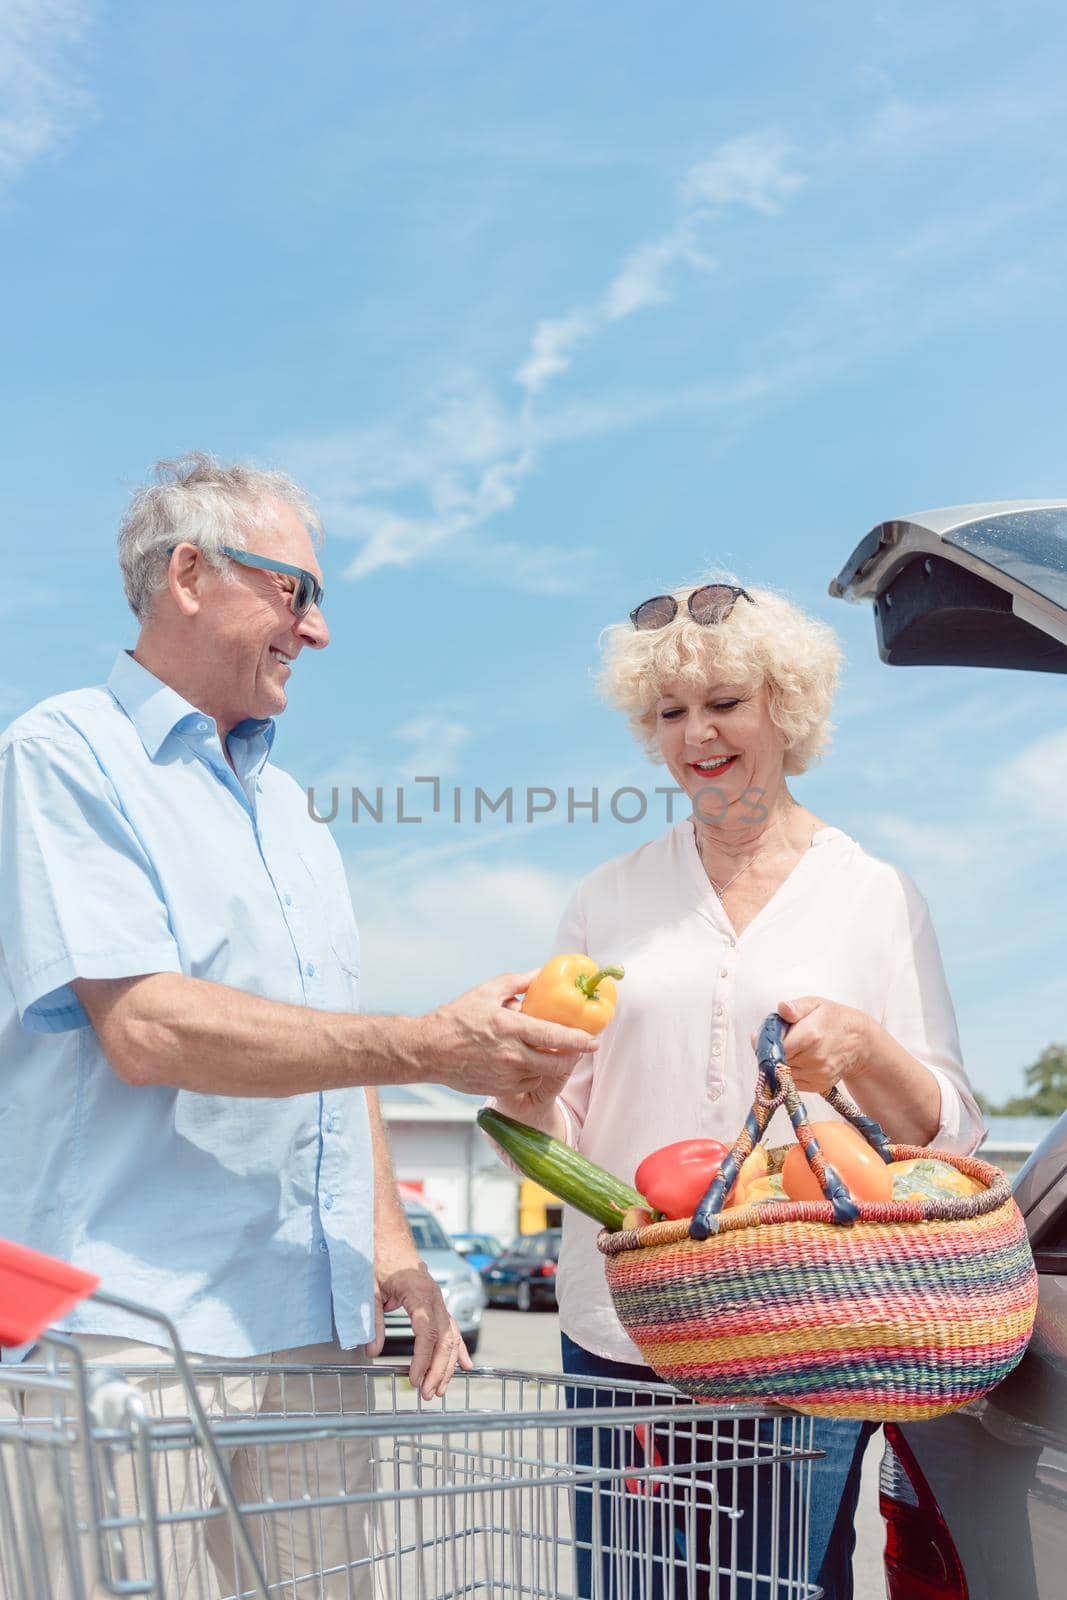 Low-angle view portrait of an active senior man holding a shopping cart while looking at his wife with love against blue sky